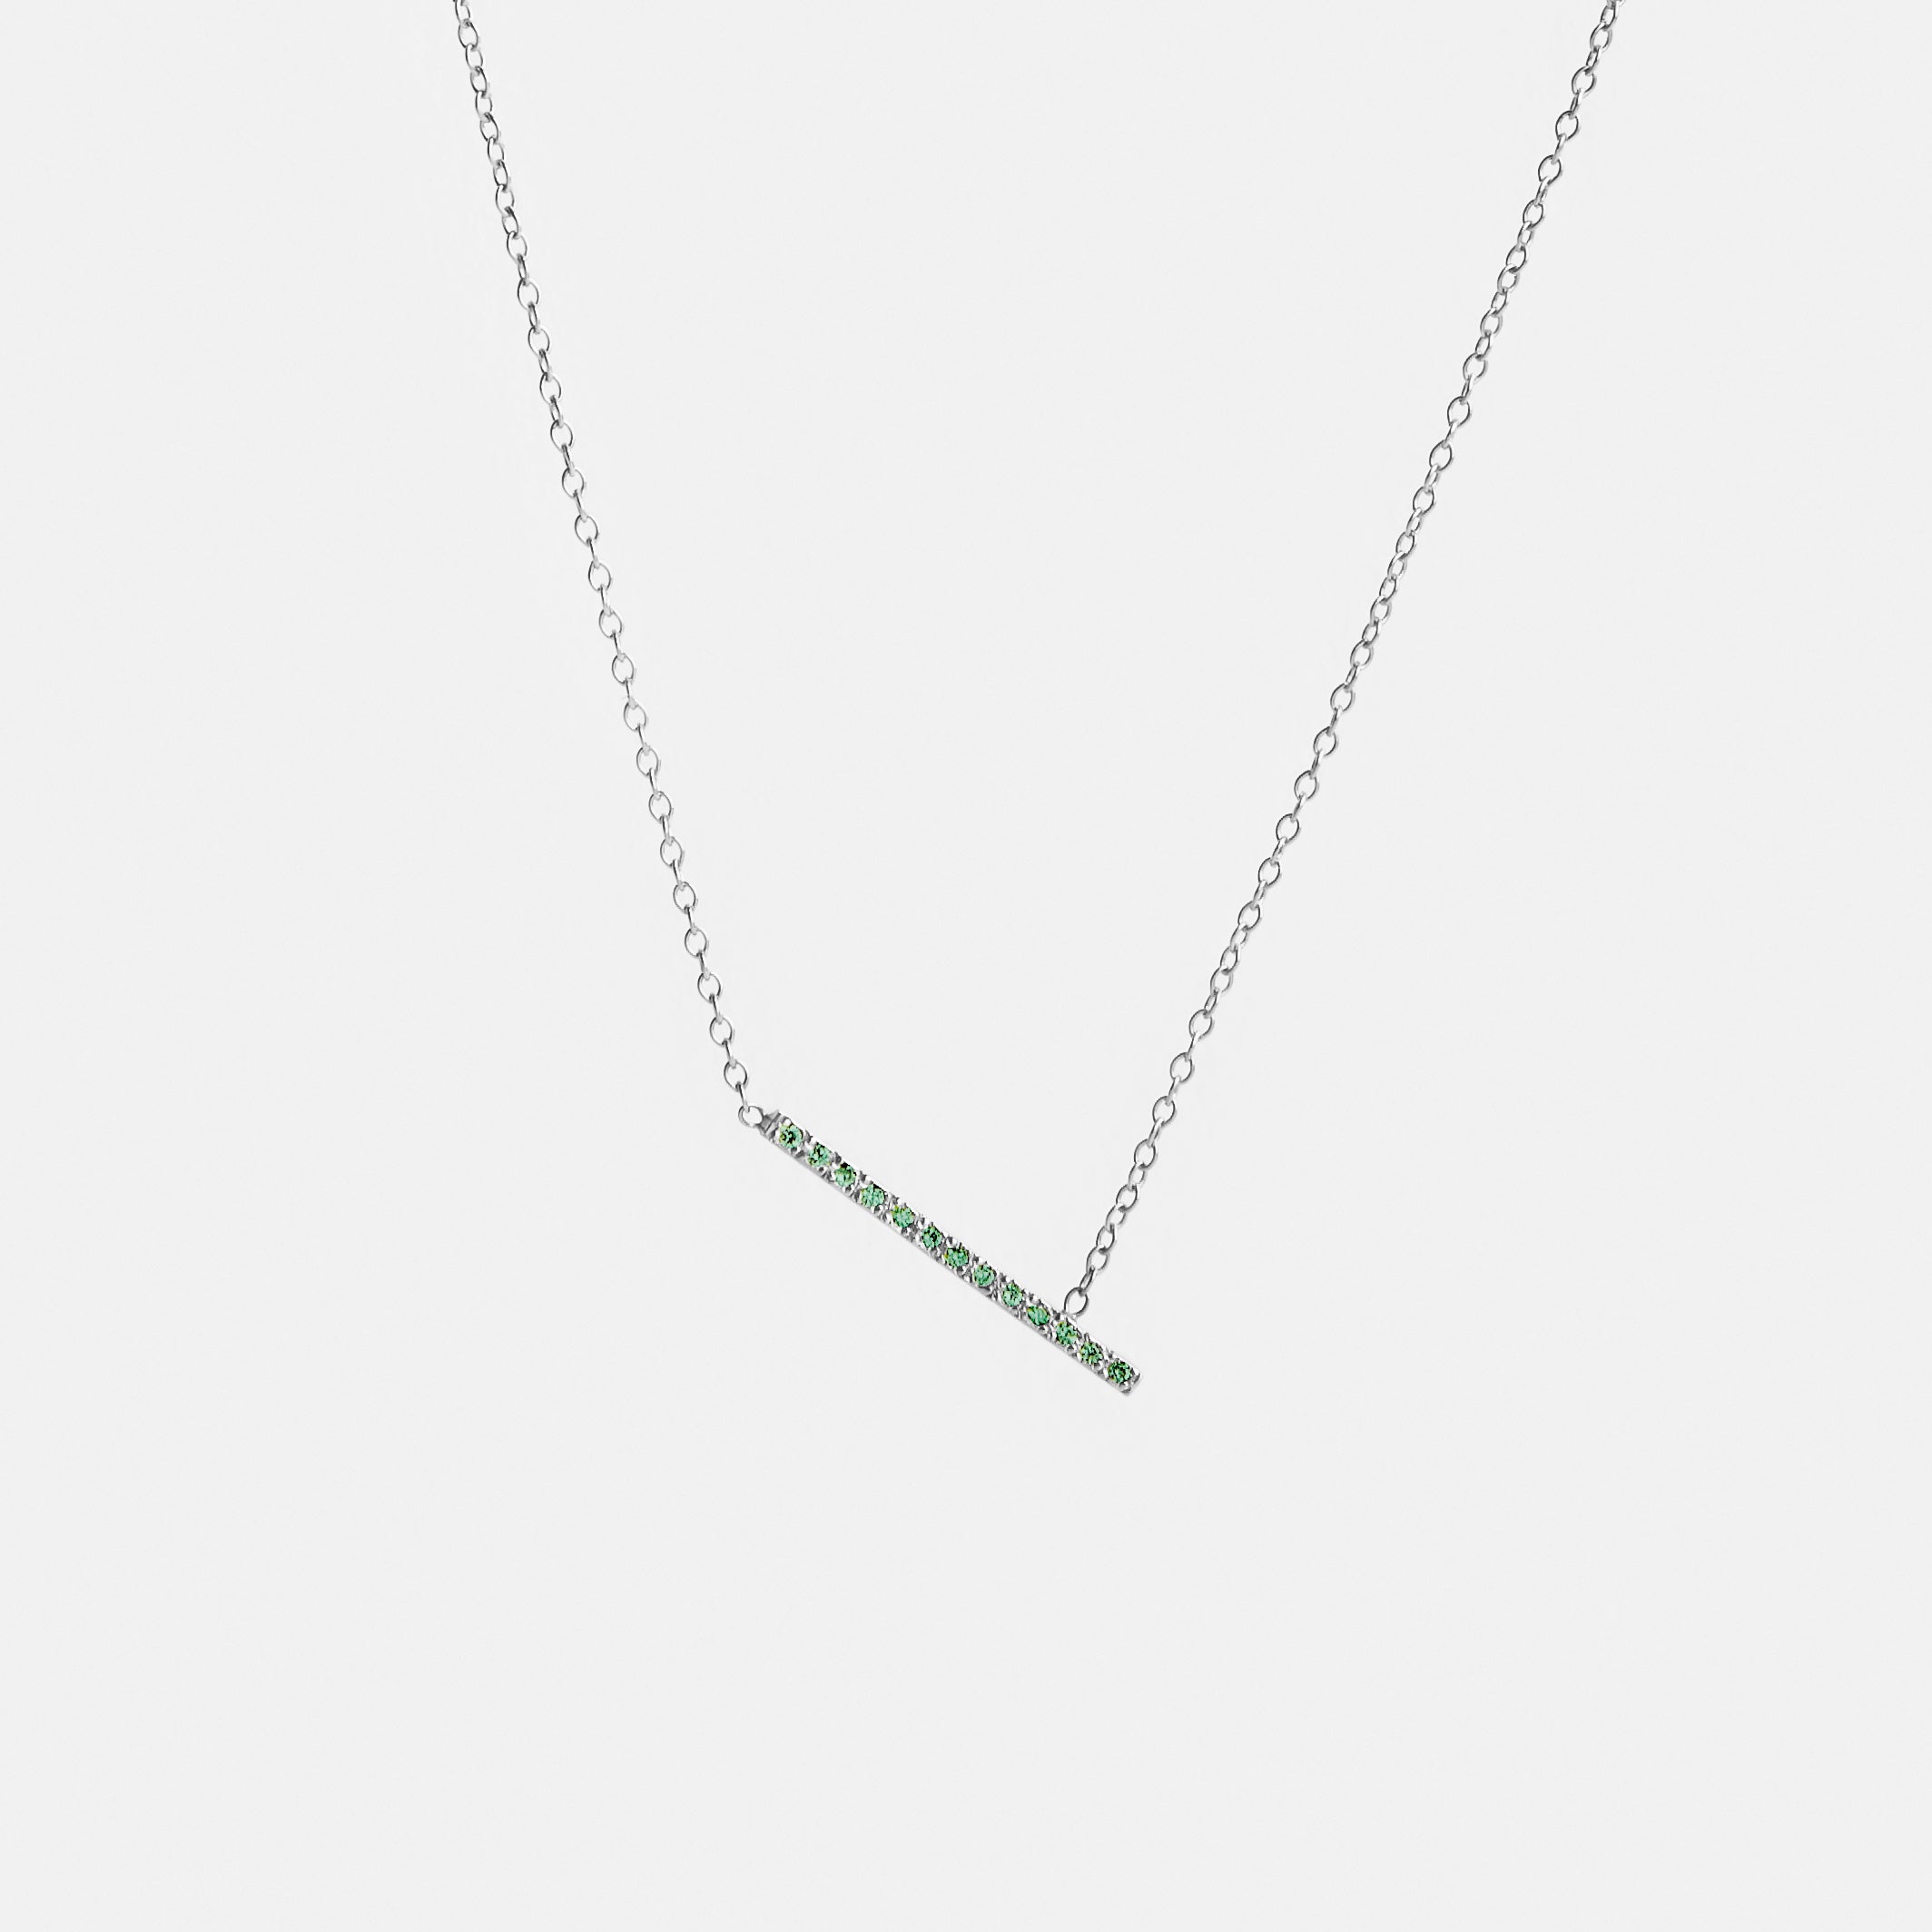 Tira Designer Necklace in 14k White Gold set with Emeralds By SHW Fine Jewelry NYC